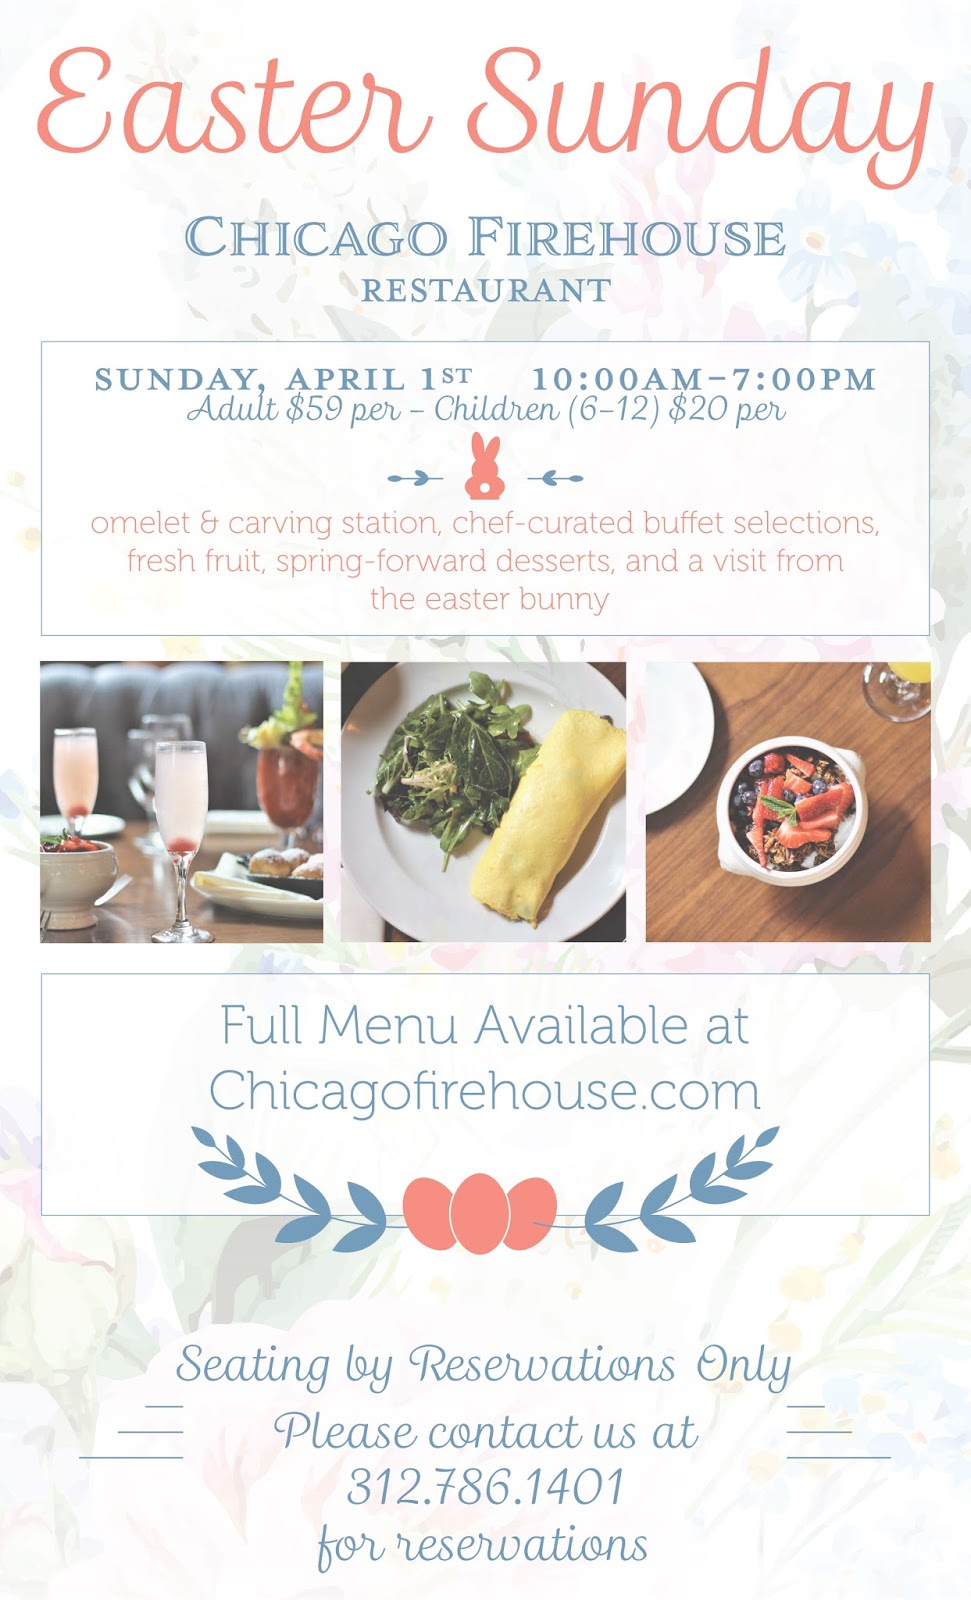 Where to Enjoy Easter Brunch in Chicagoland